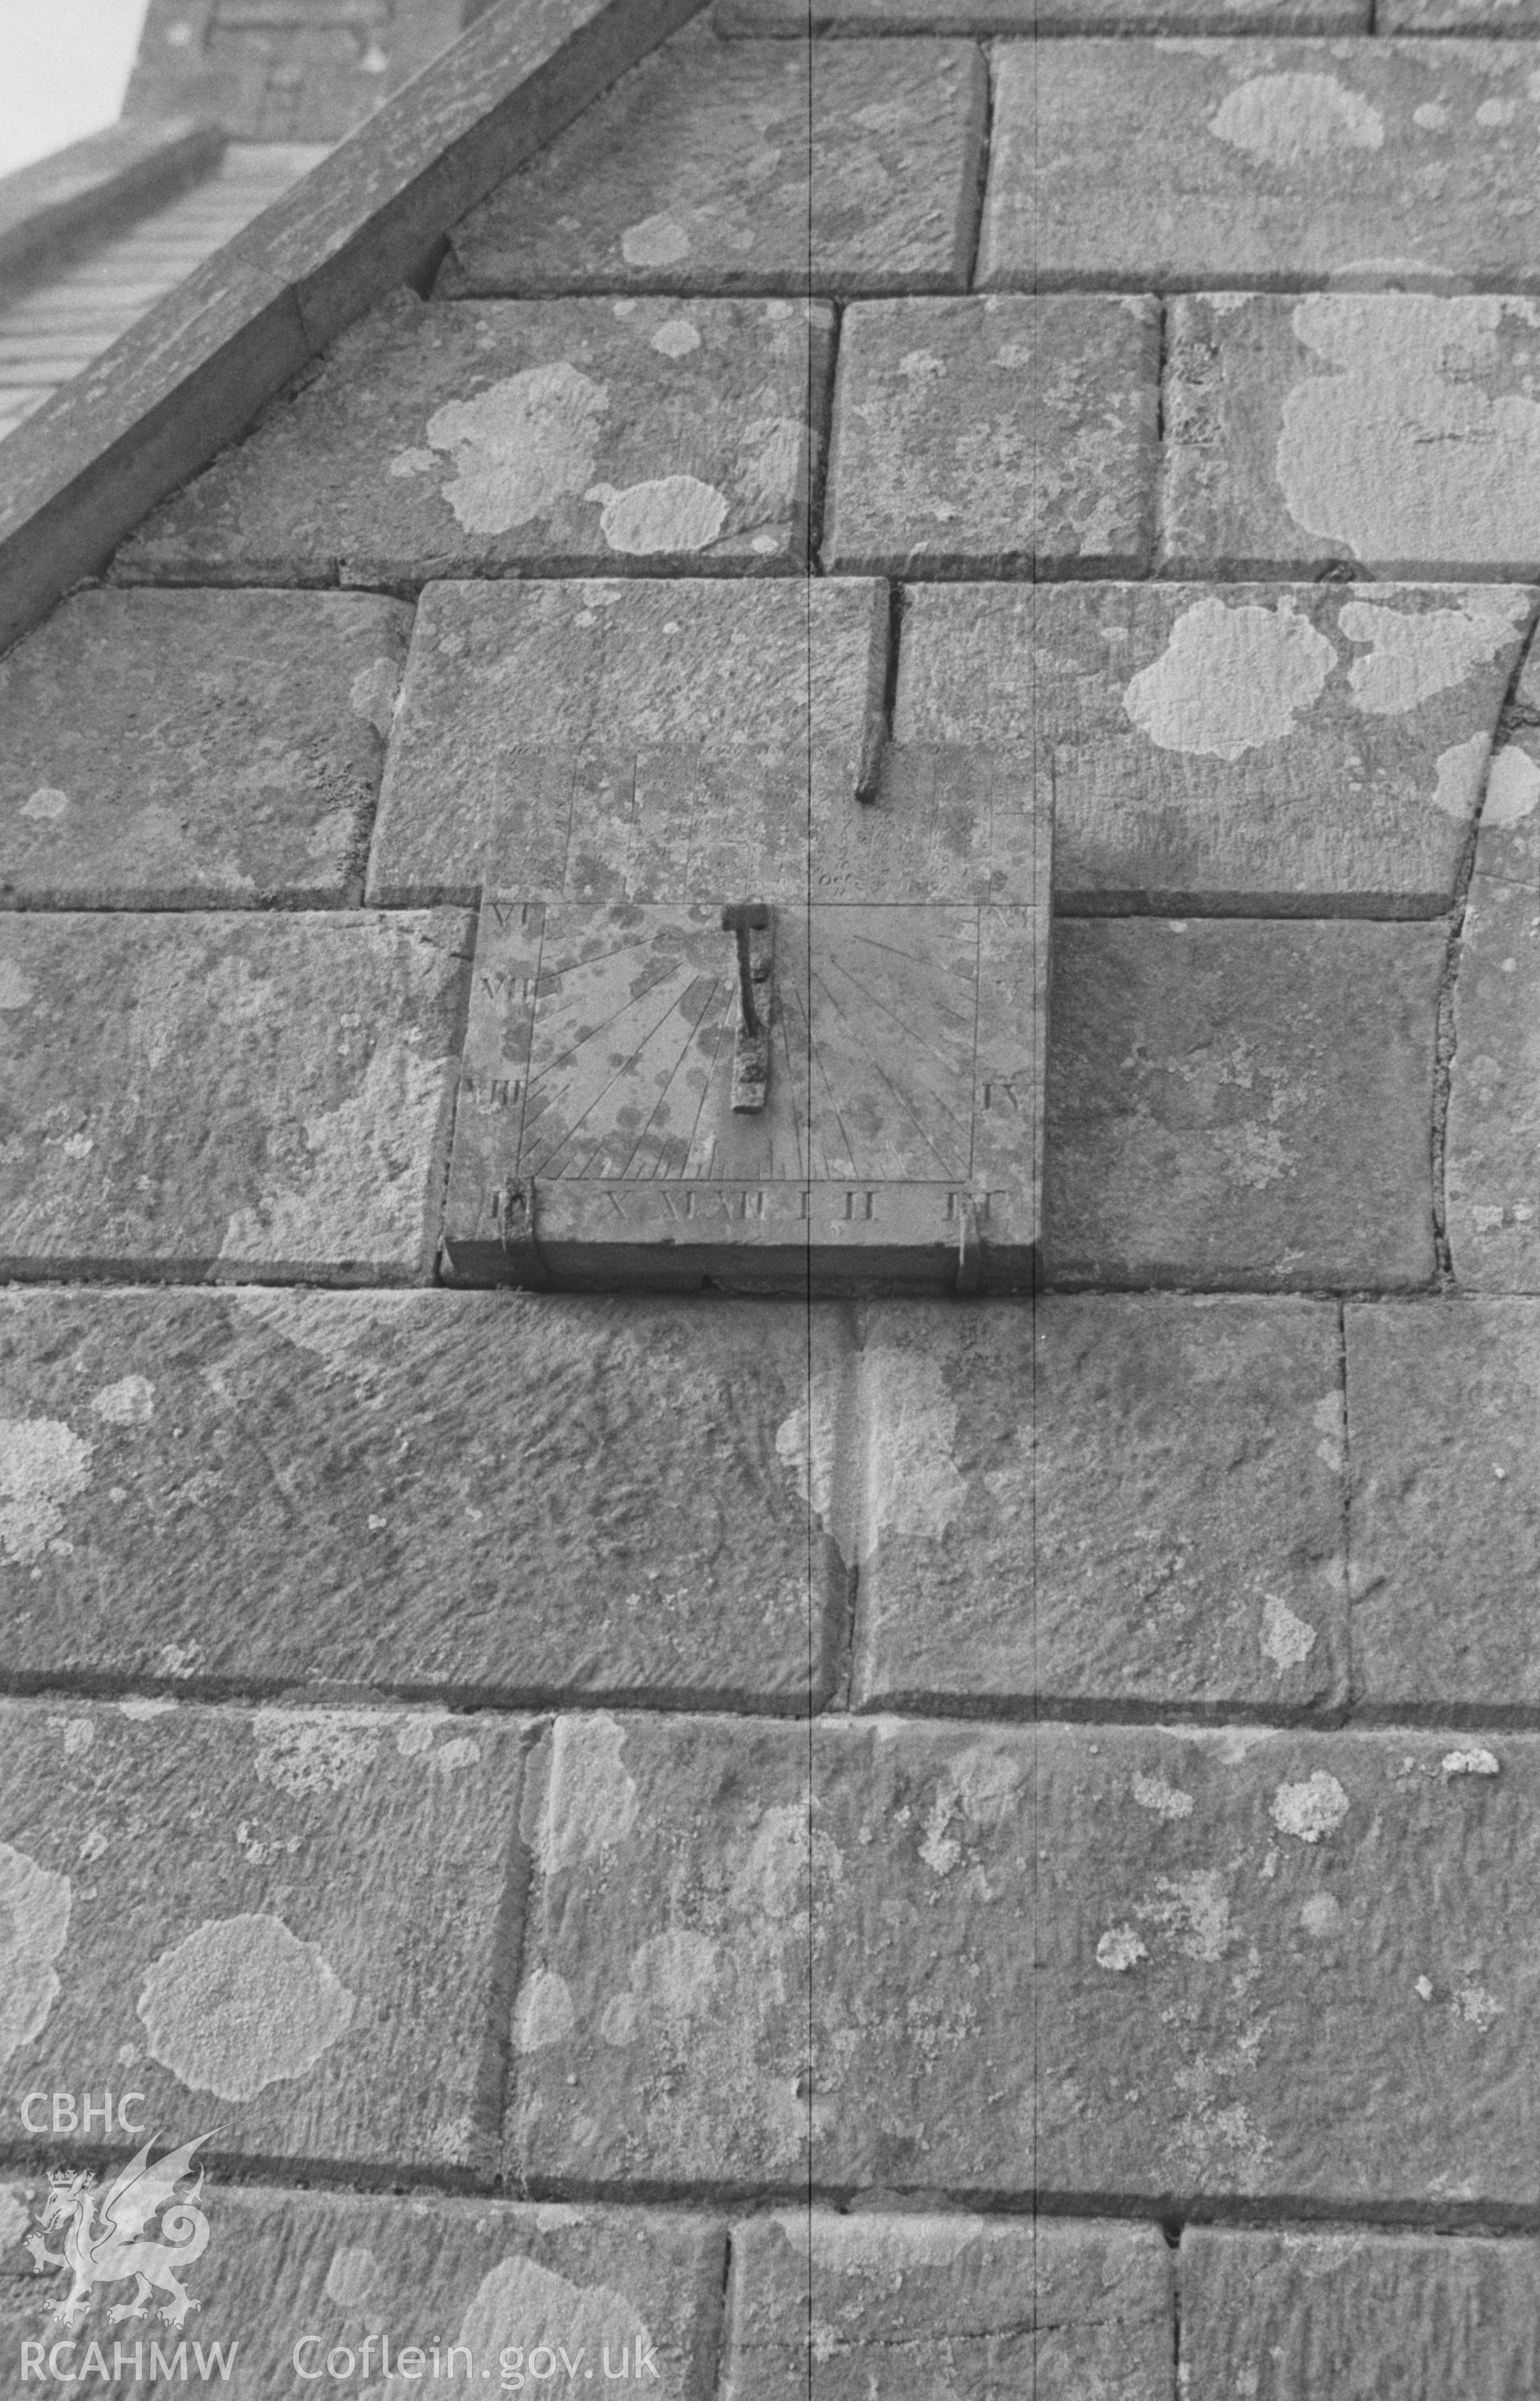 Digital copy of a black and white negative showing sundial on the wall of the porch at St Michael's Church, Troedyraur, east of Cardigan. Photographed in April 1963 by Arthur O. Chater from Grid Reference SN 3271 4536, looking north.